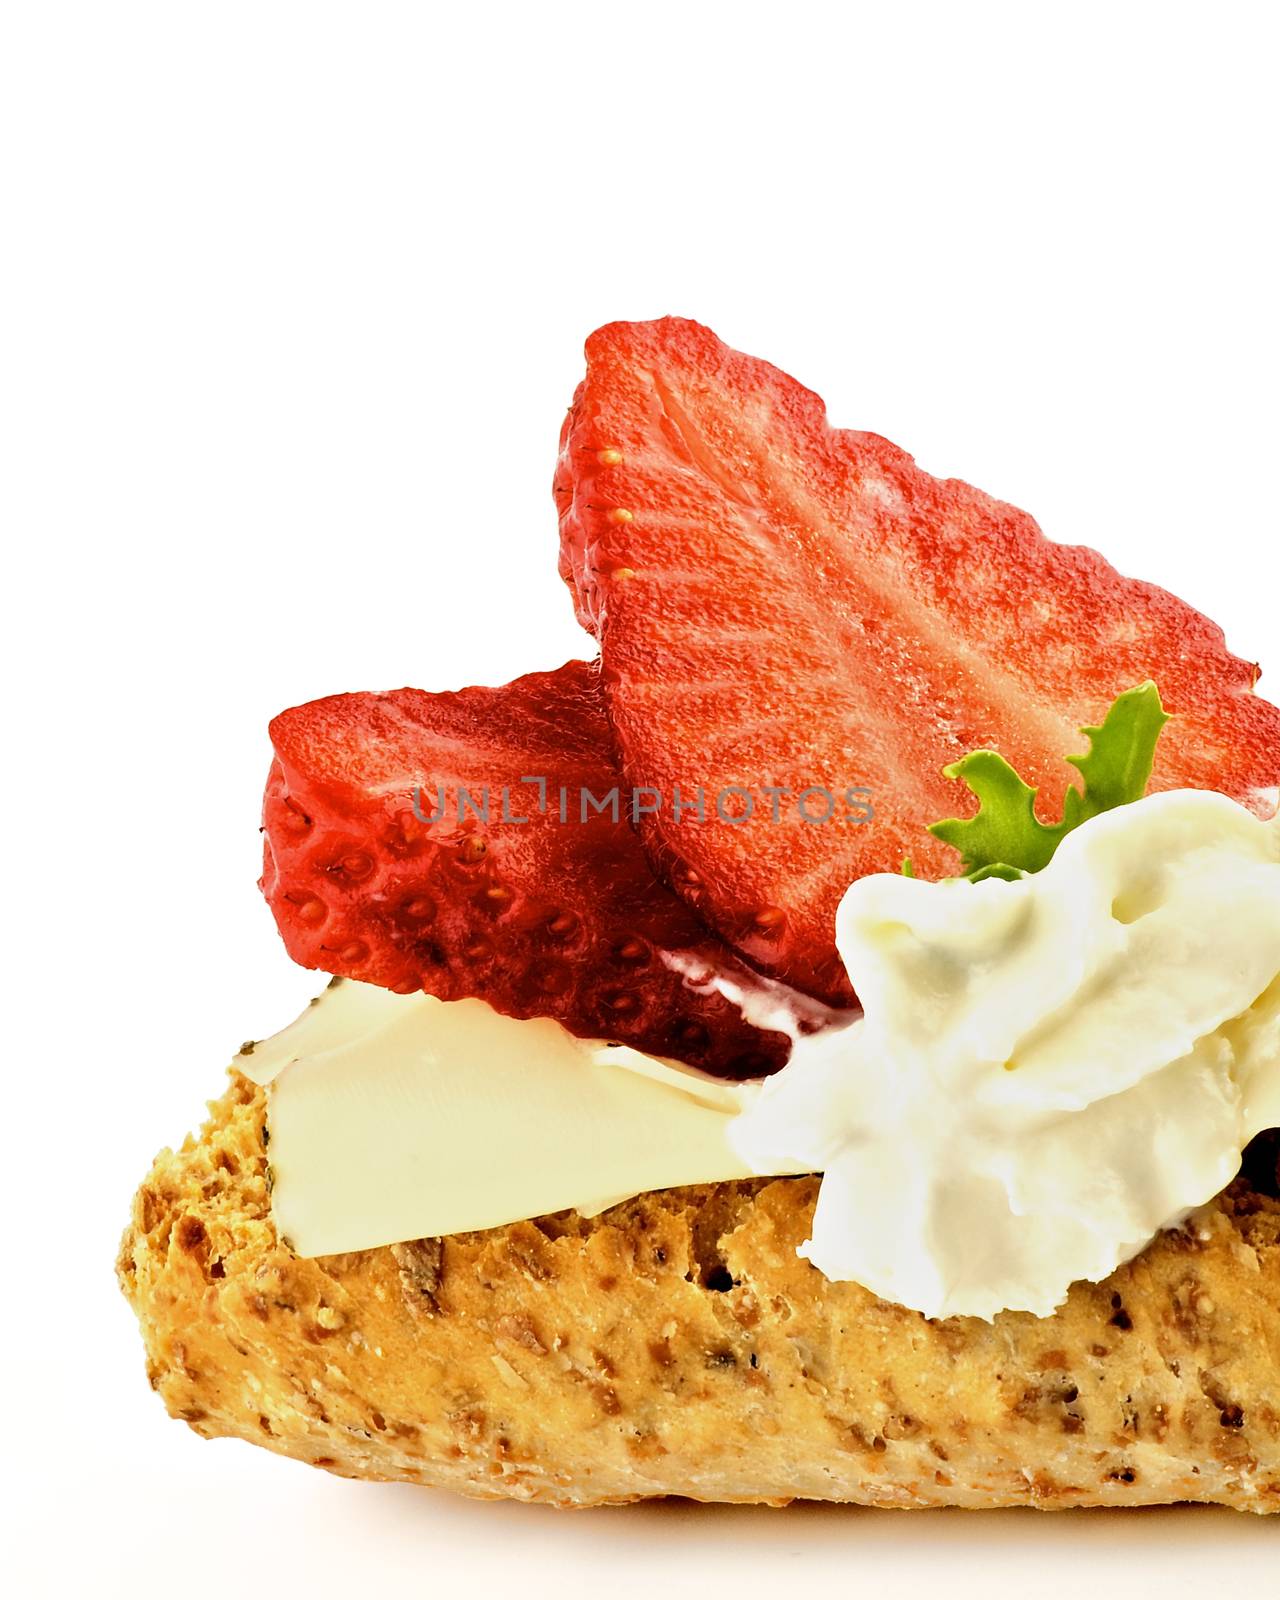 Delicious Cottage Cheese and Strawberry Sandwich with Crisp Bread Cross Section on White background